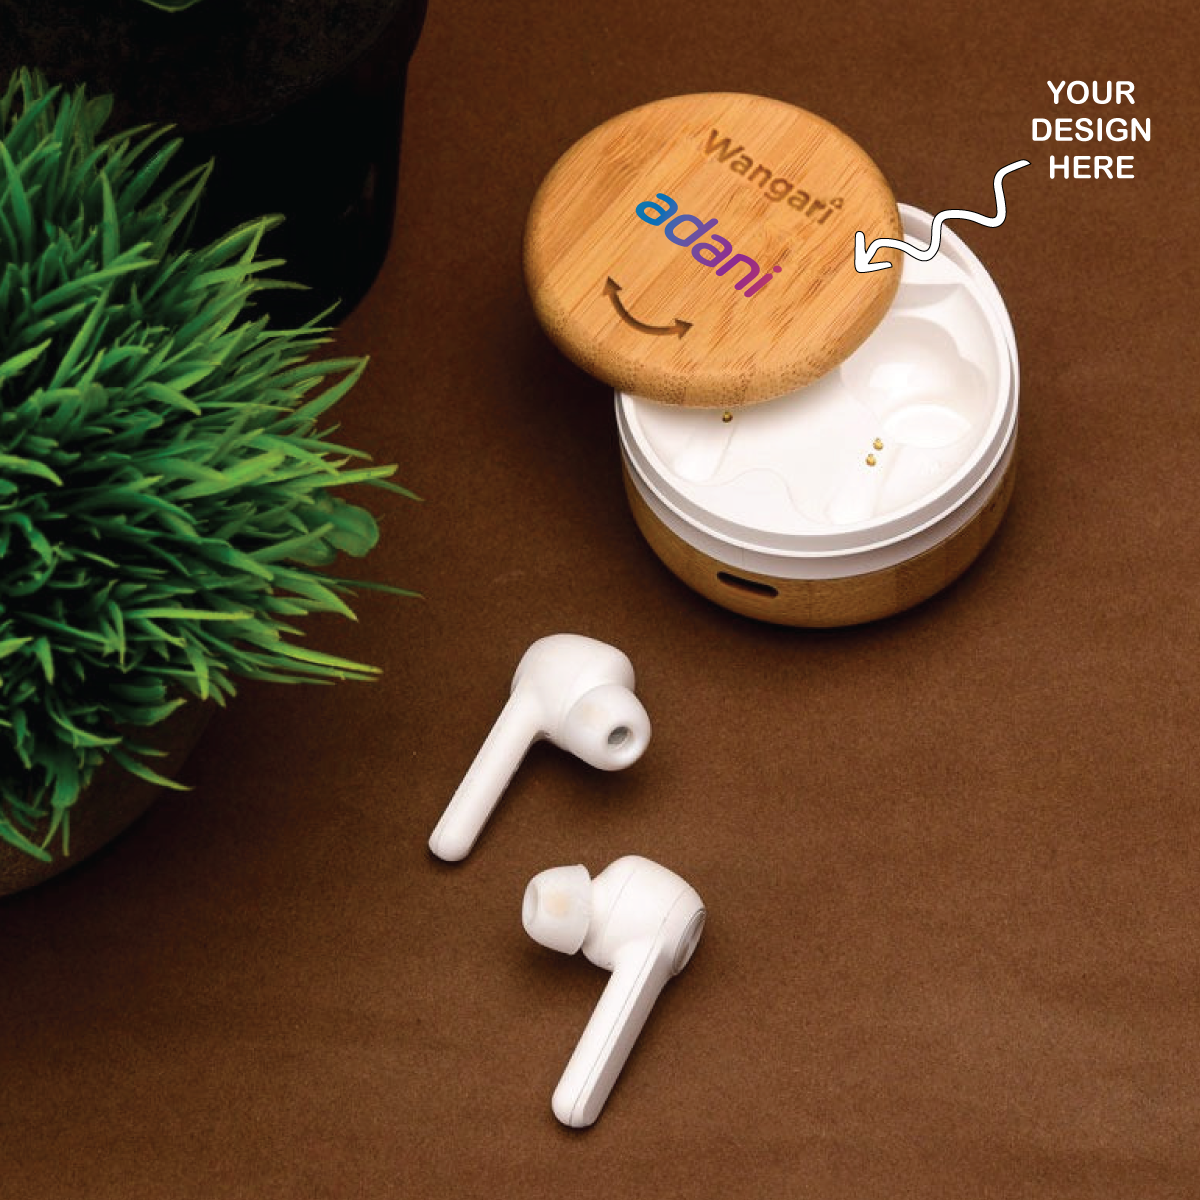 Personalized Bamboo Wireless Earbuds - For Corporate Gifting, Event Gifting, Stakeholder Gifting, Freebies, Promotions, Return Gift - HKWAE9001